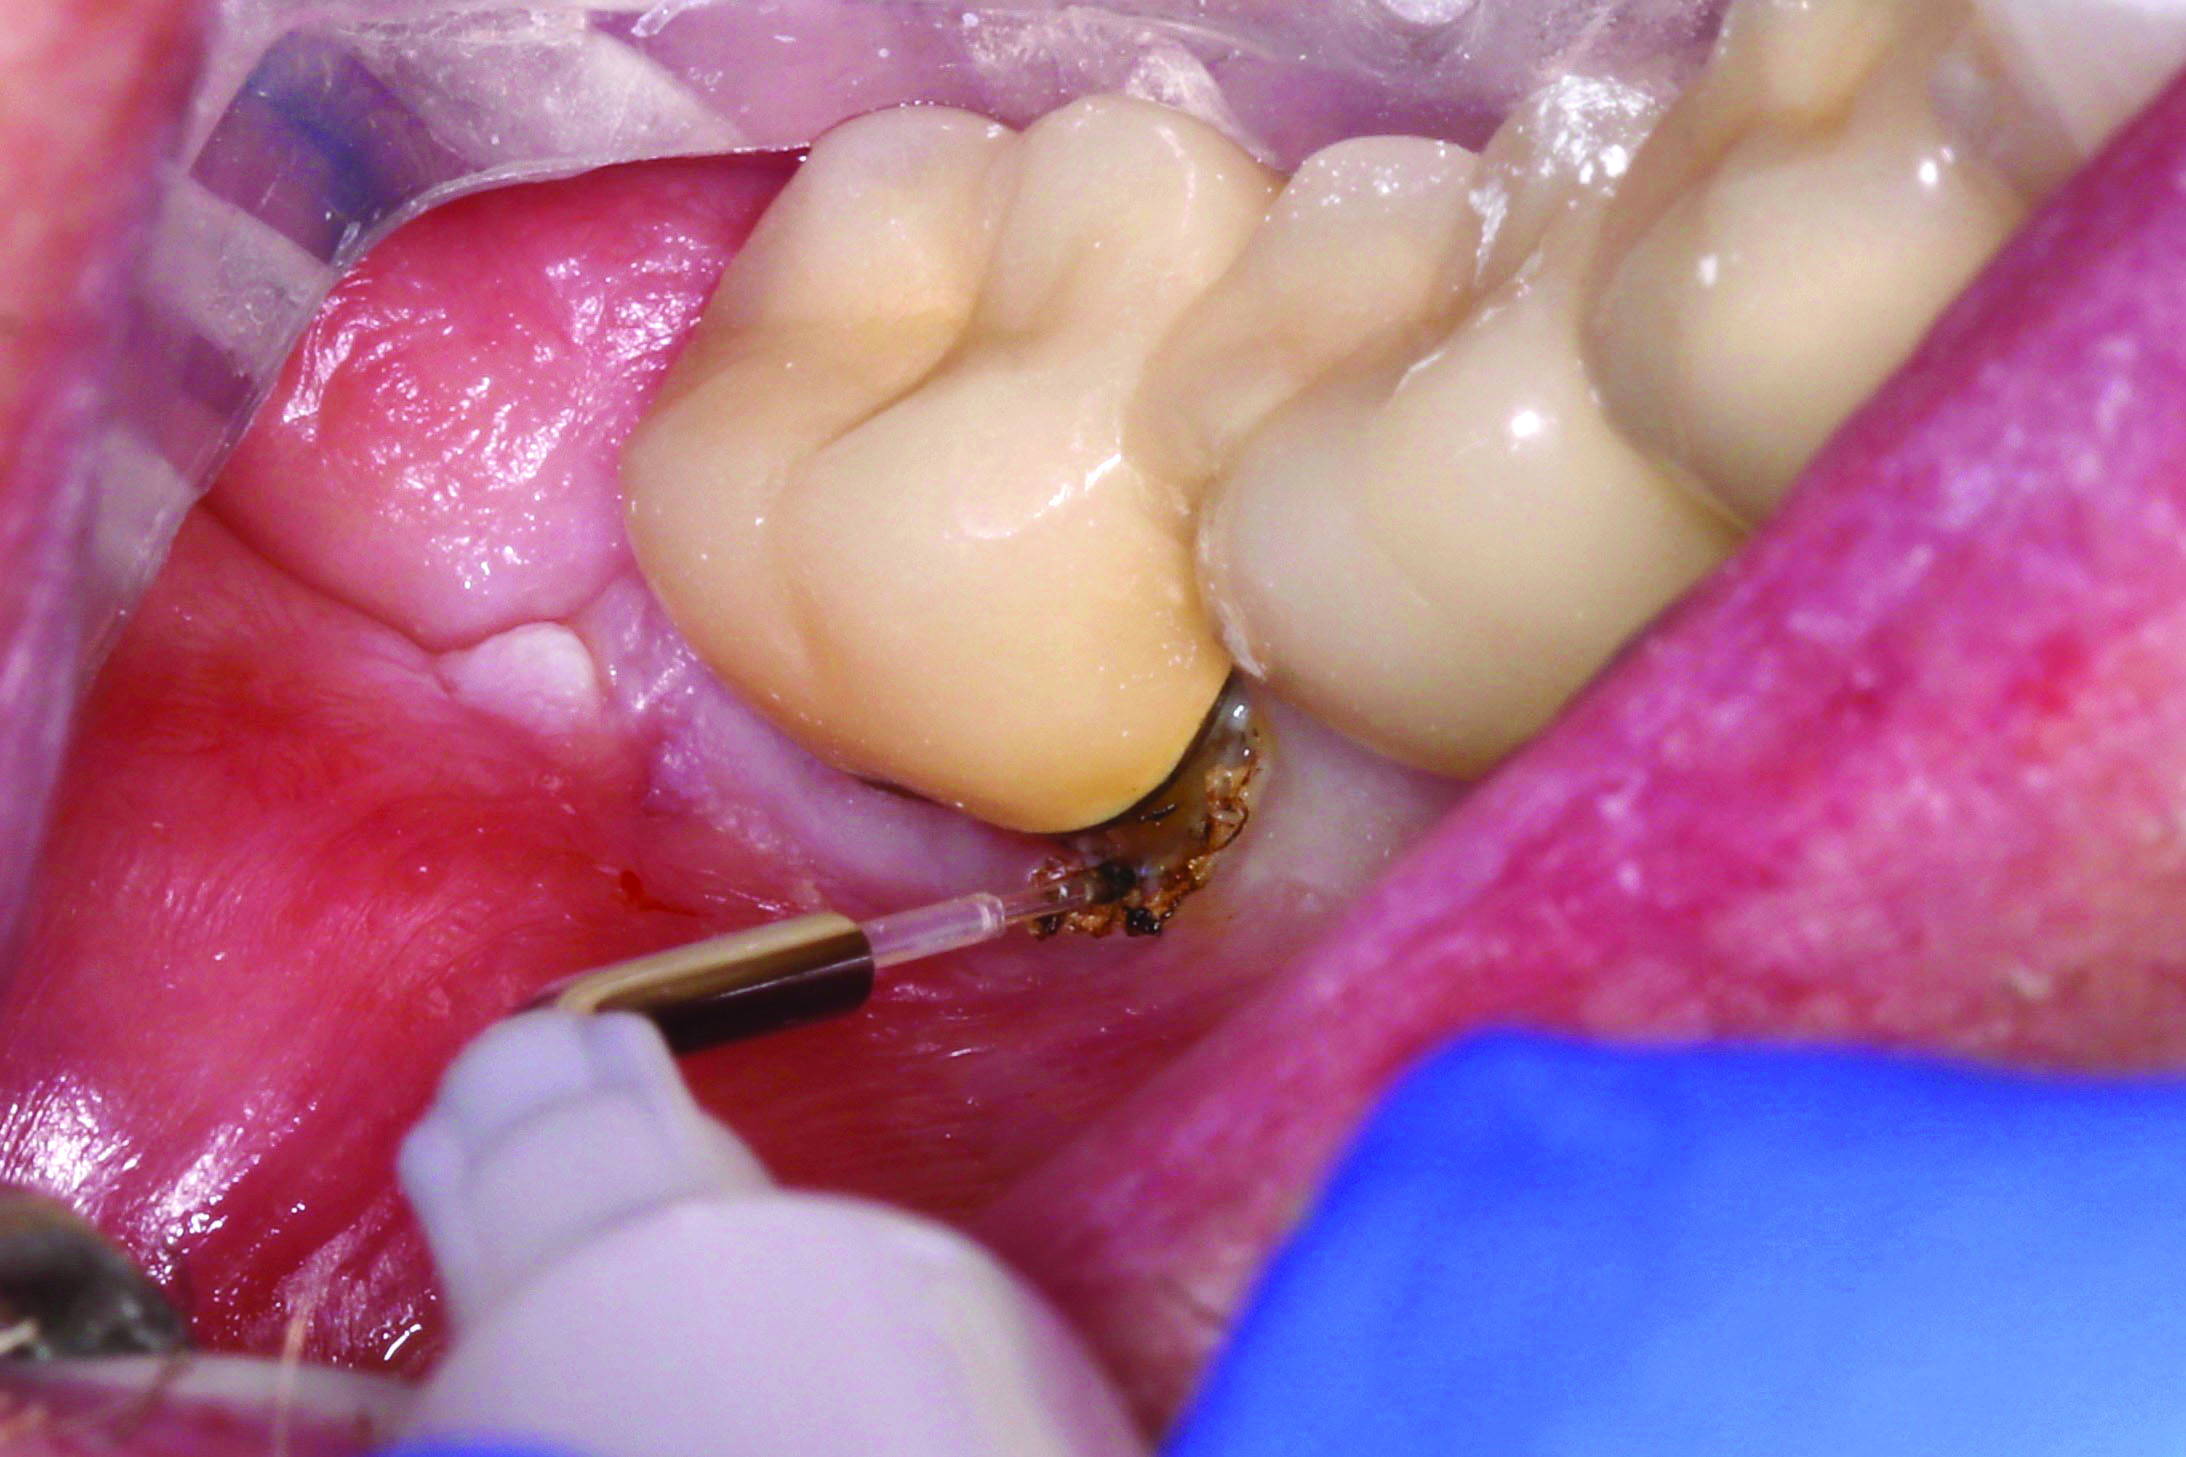 Removing the necessary tissue needed to allow for the proper access for decay removal as well as restoration placement